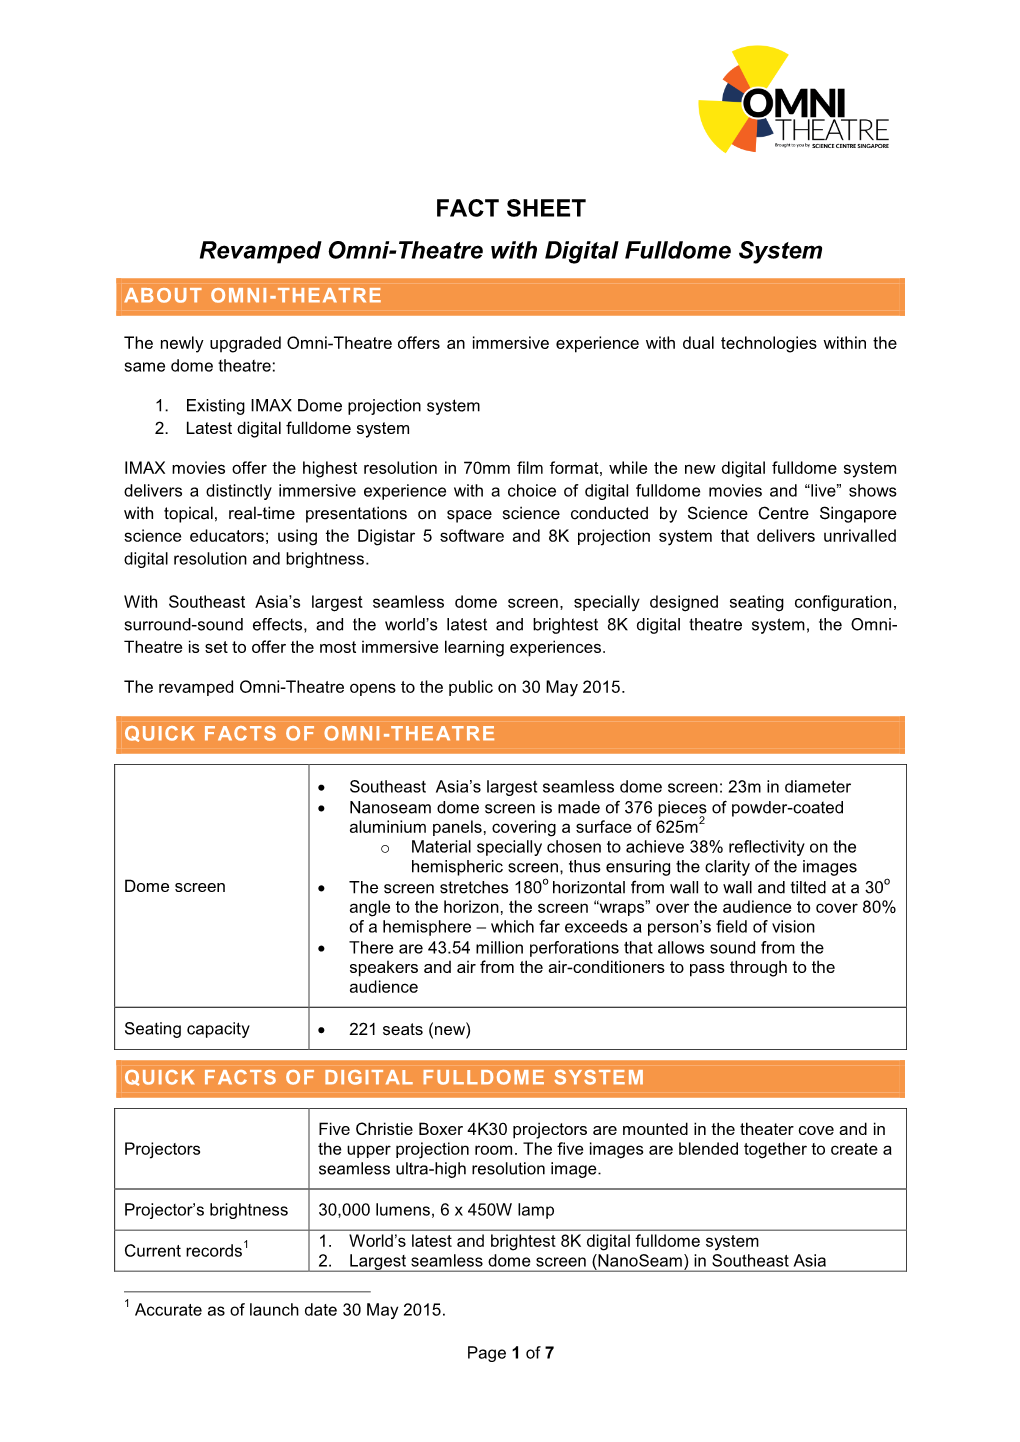 FACT SHEET Revamped Omni-Theatre with Digital Fulldome